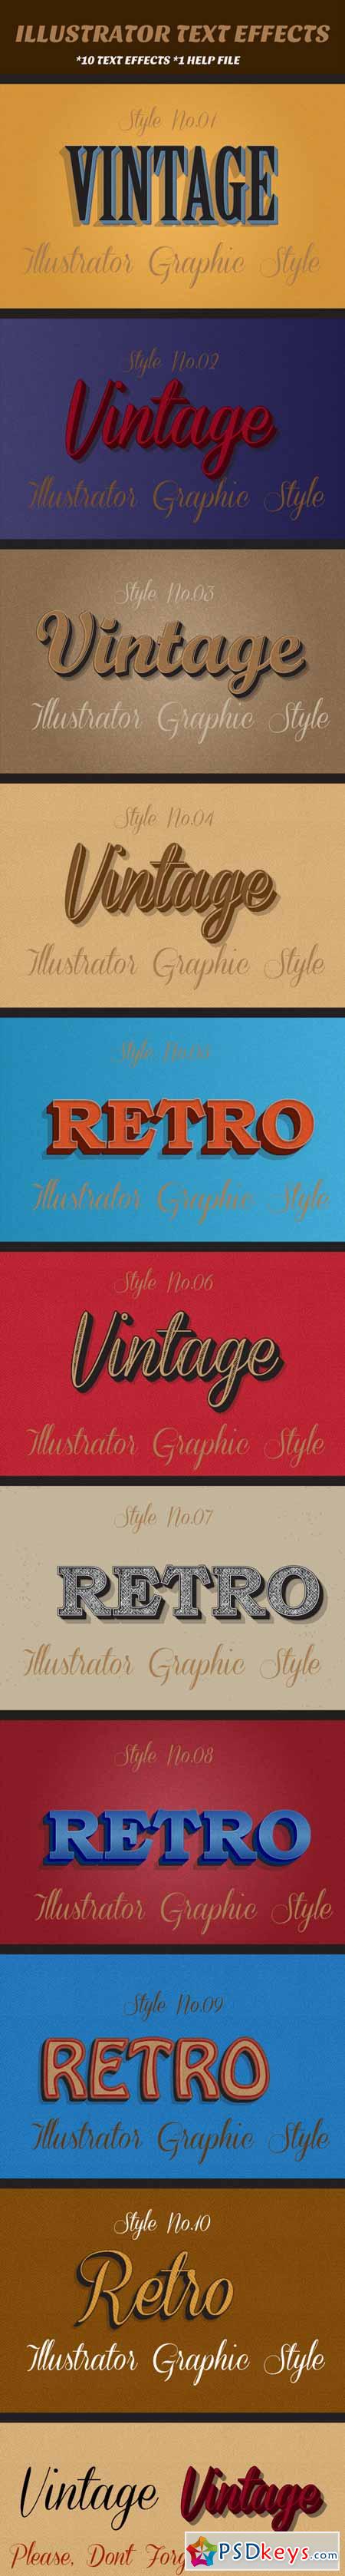 Retro Vintage Text Effects 12607083